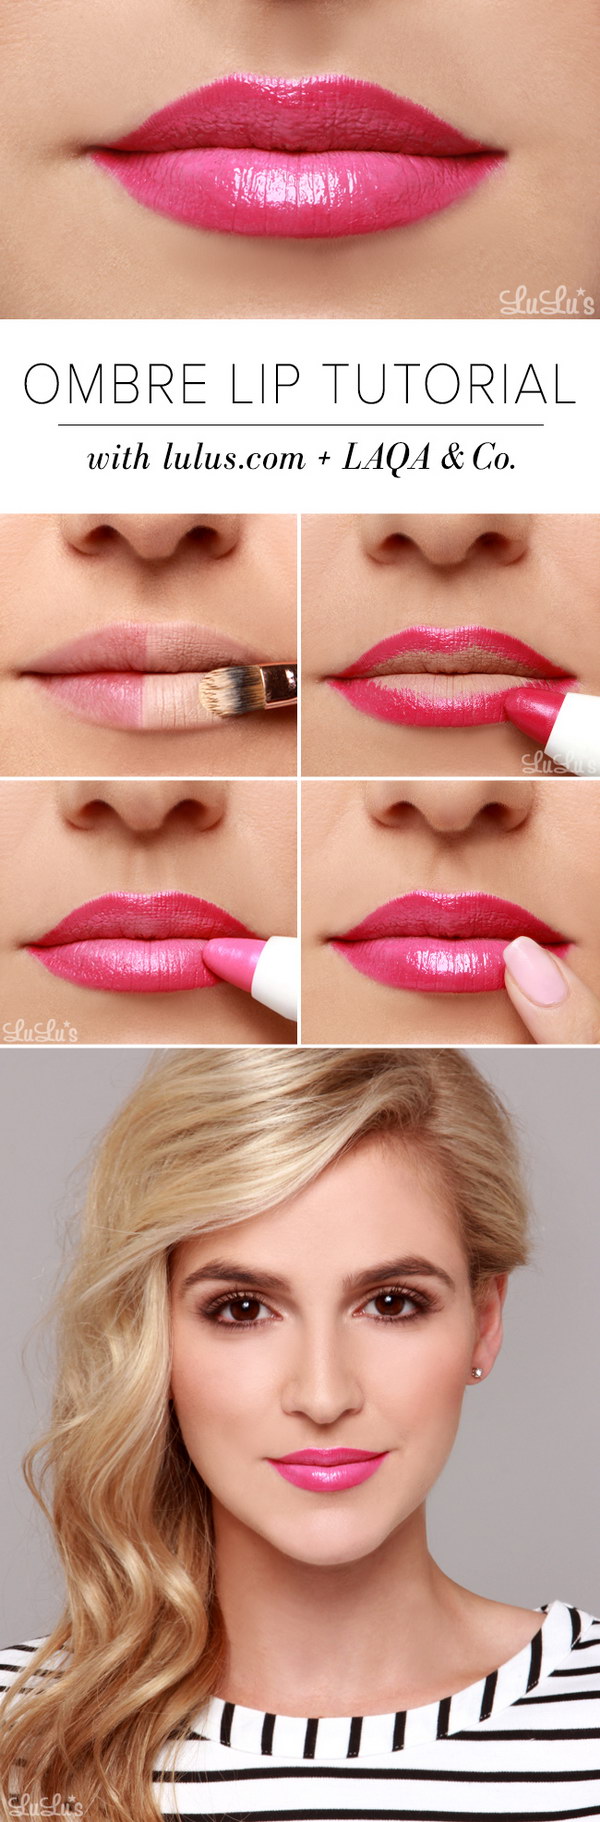 How to Get Pink Ombre Lip. 